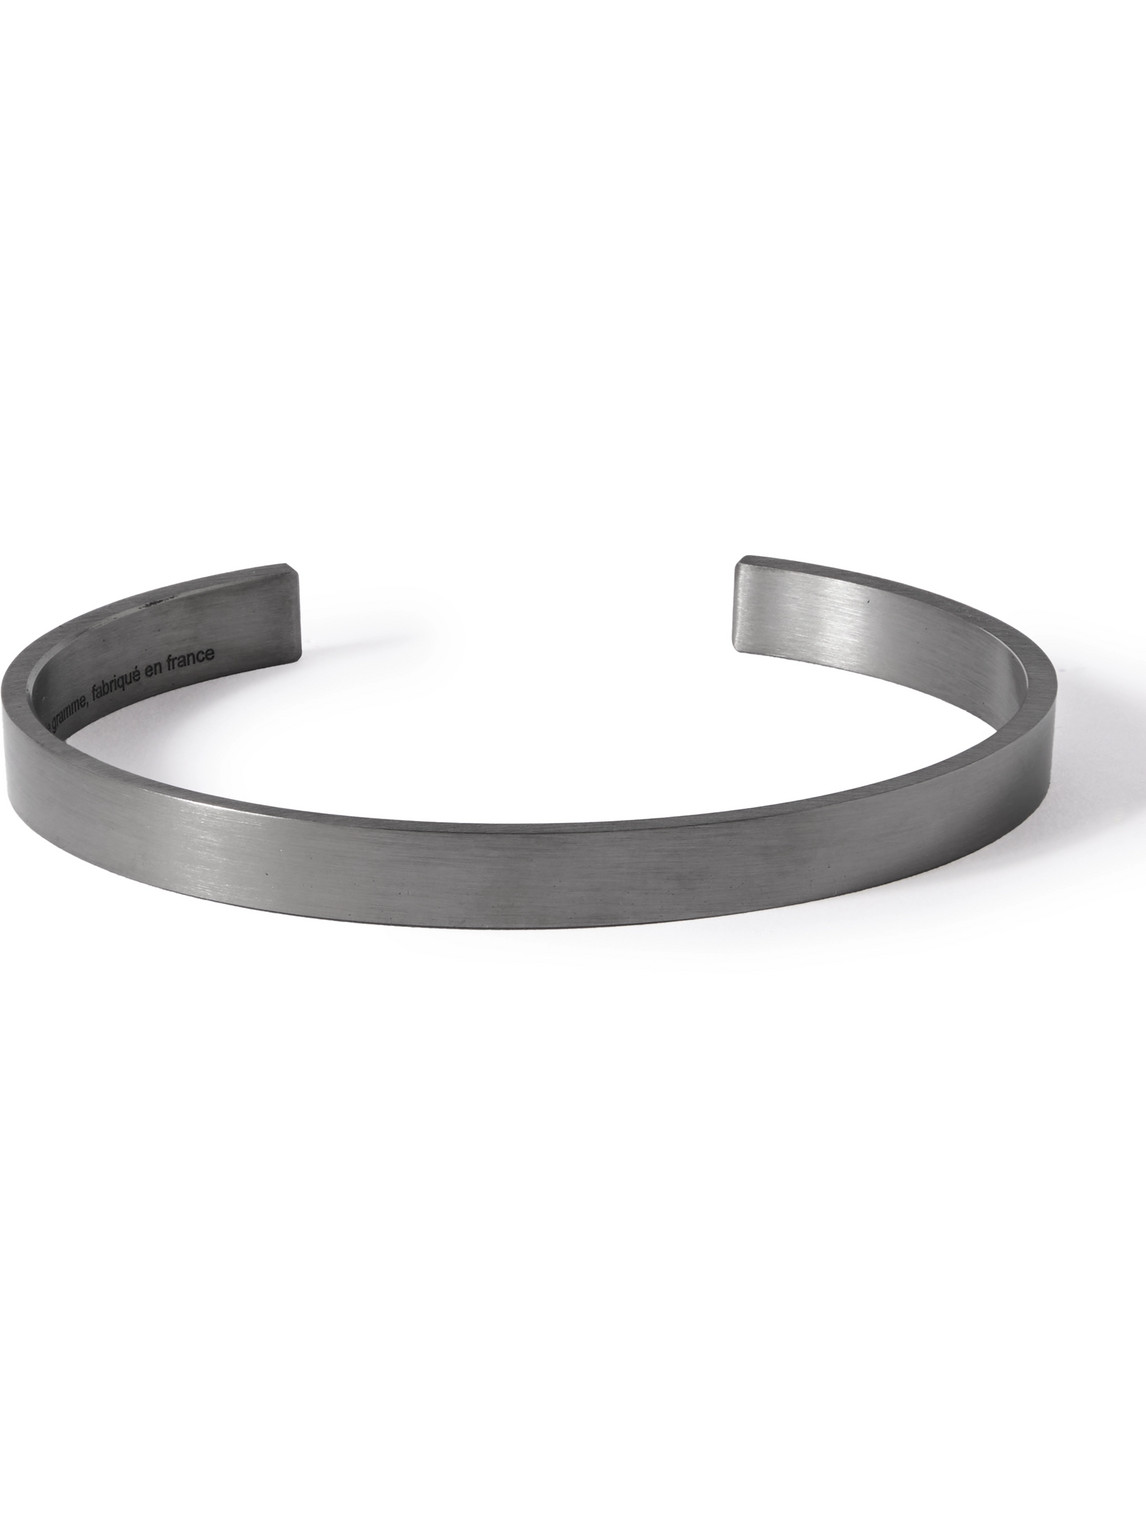 Le Gramme 21g Brushed Sterling Silver Cuff